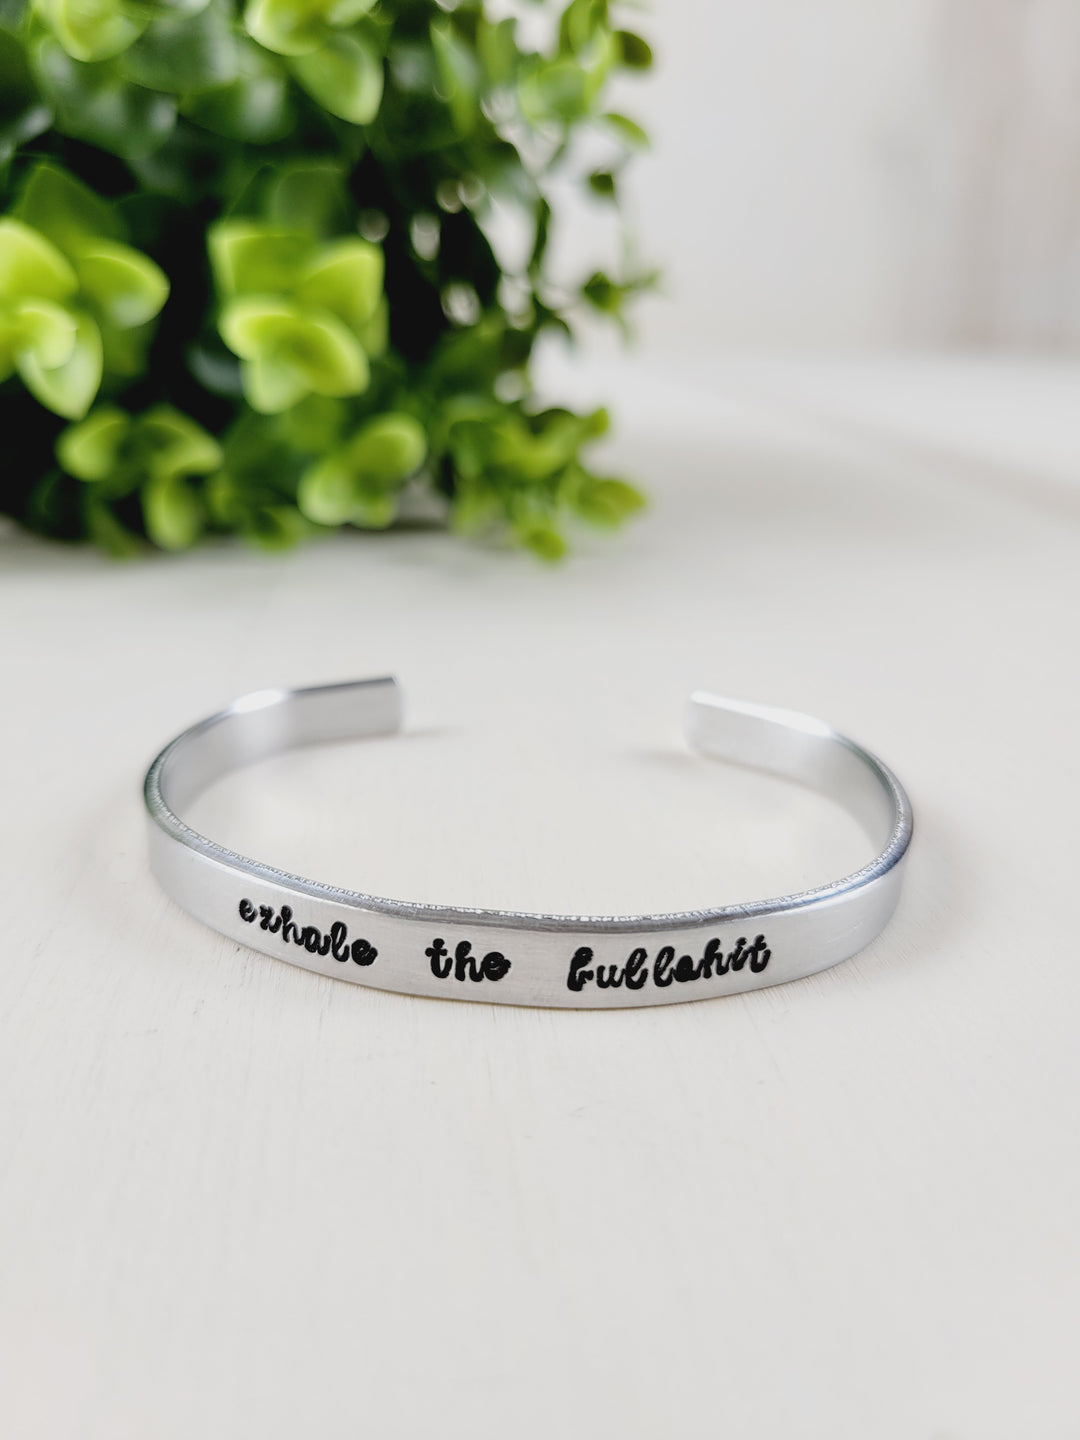 Wicked Lovely Creations, Hand Stamped Cuffs